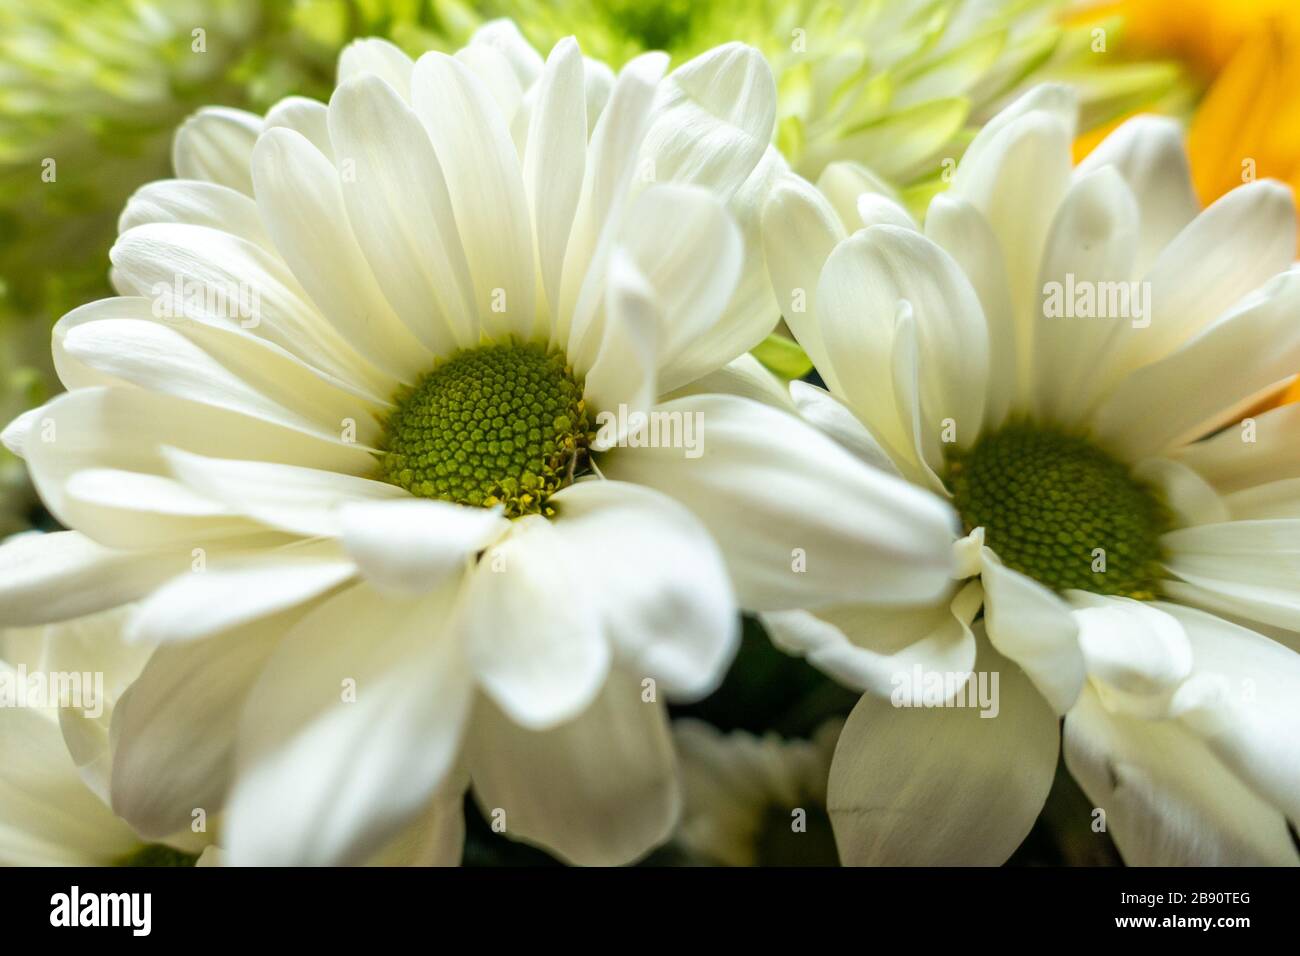 A close up view of creamy white gerbera daisy flowers in a bouquet of flowers. Stock Photo